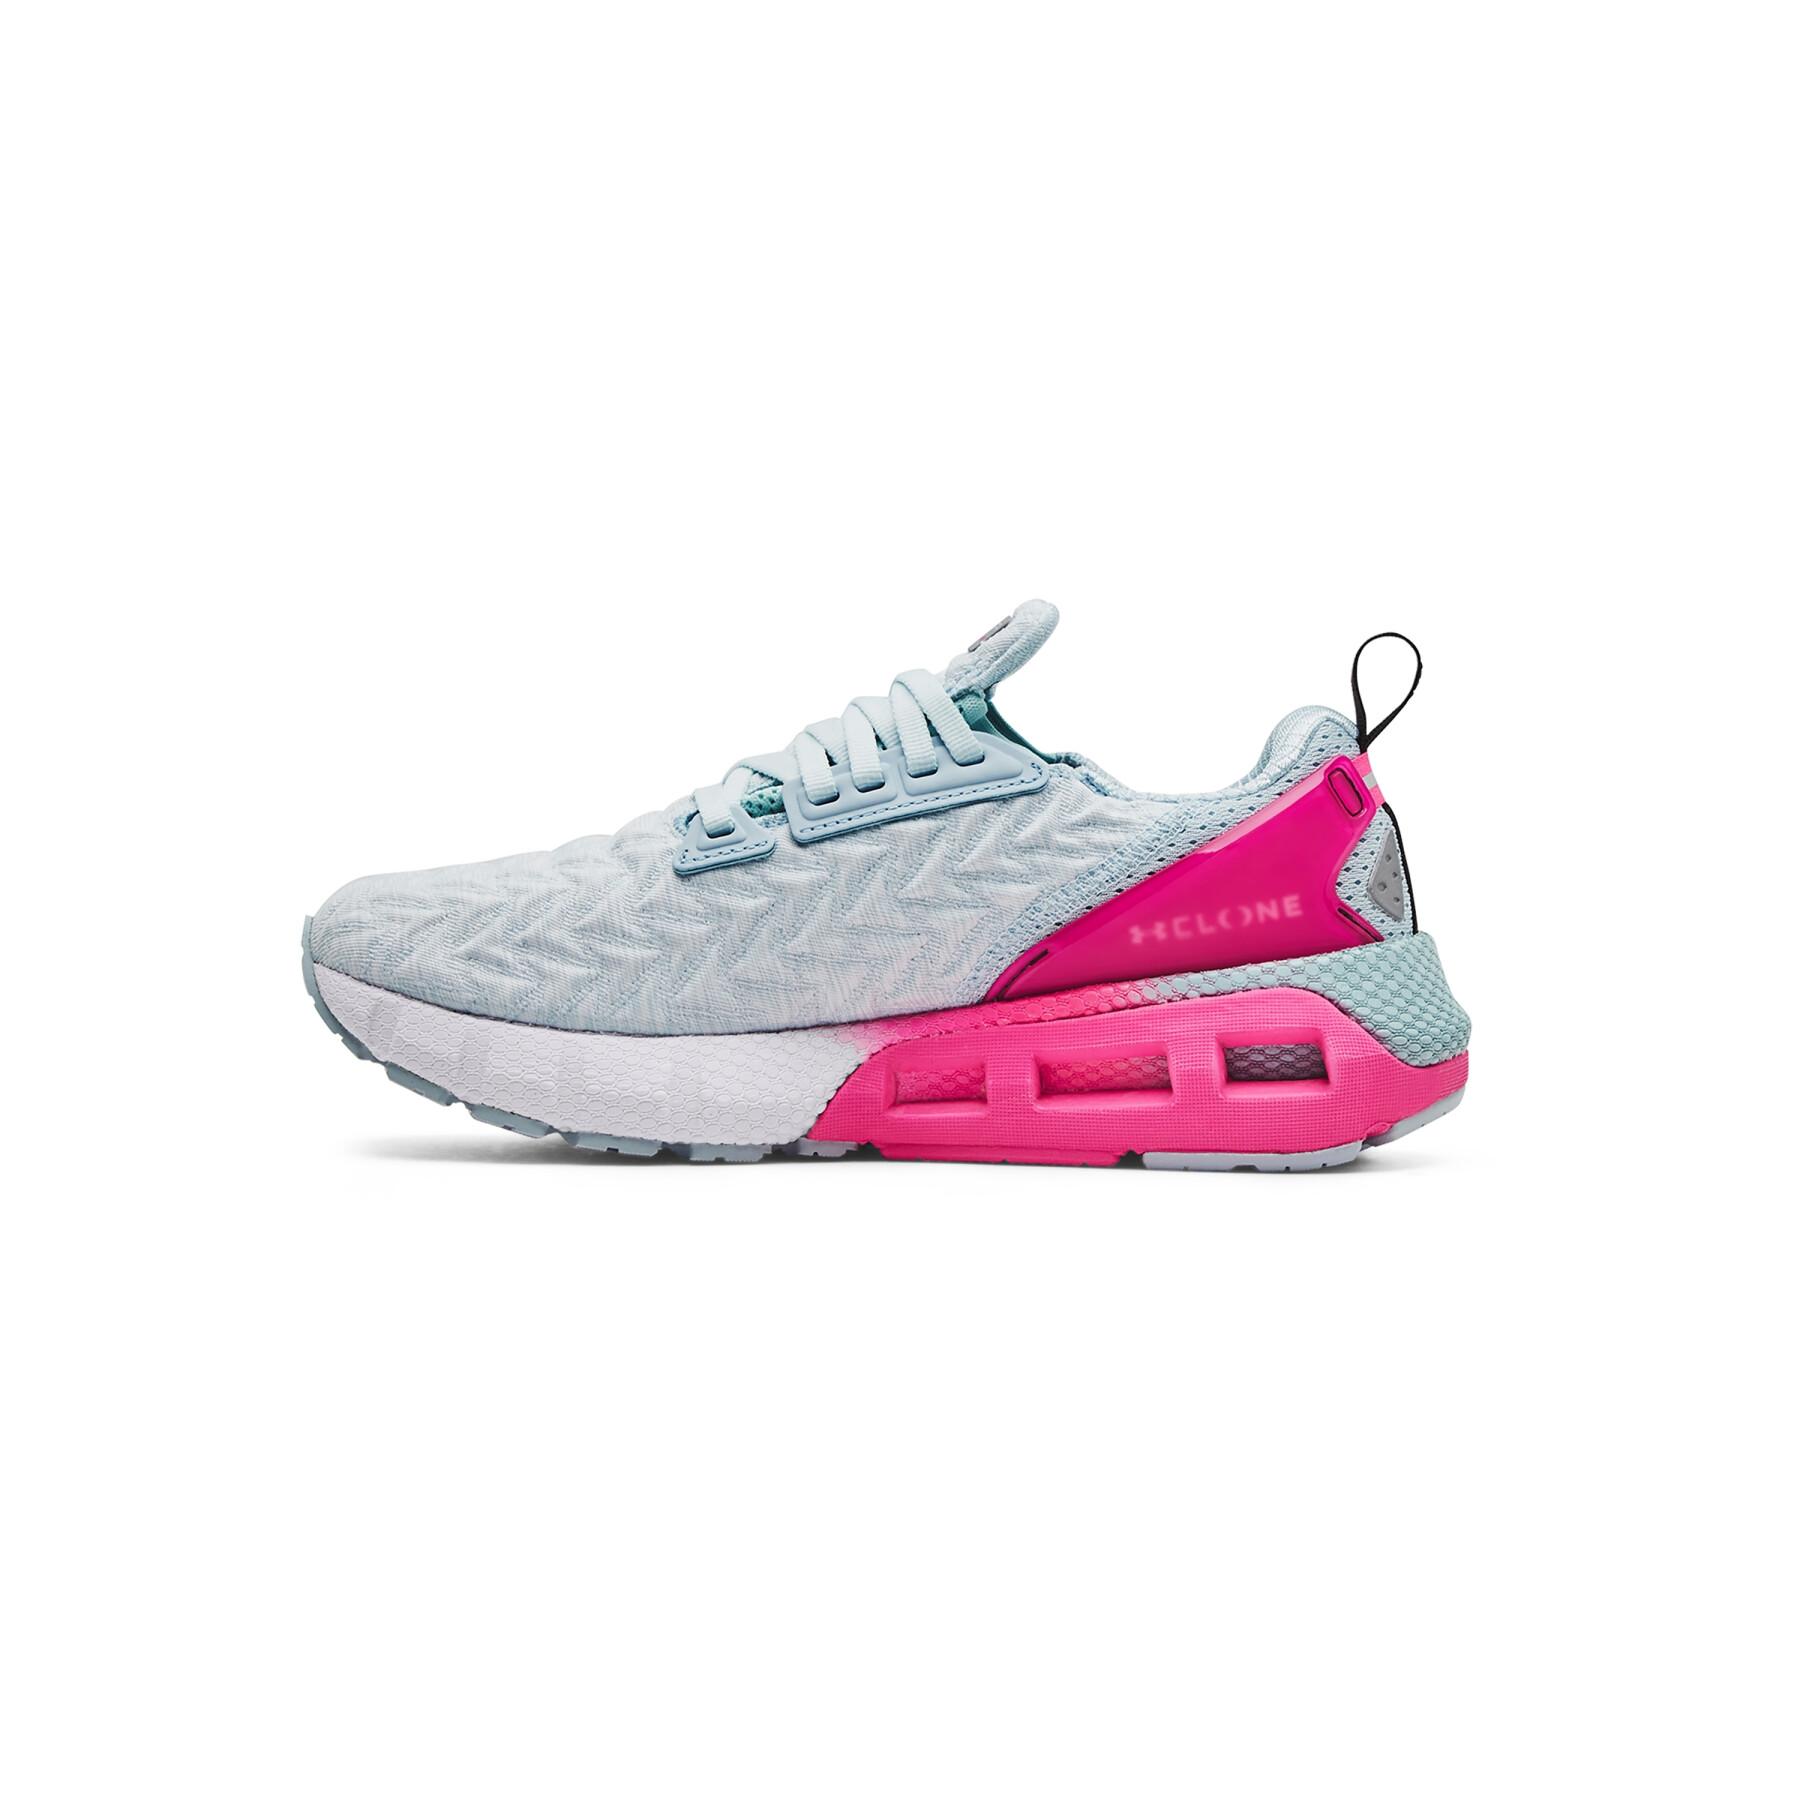 Women's running shoes Under Armour HOVR™ Mega 2 Clone